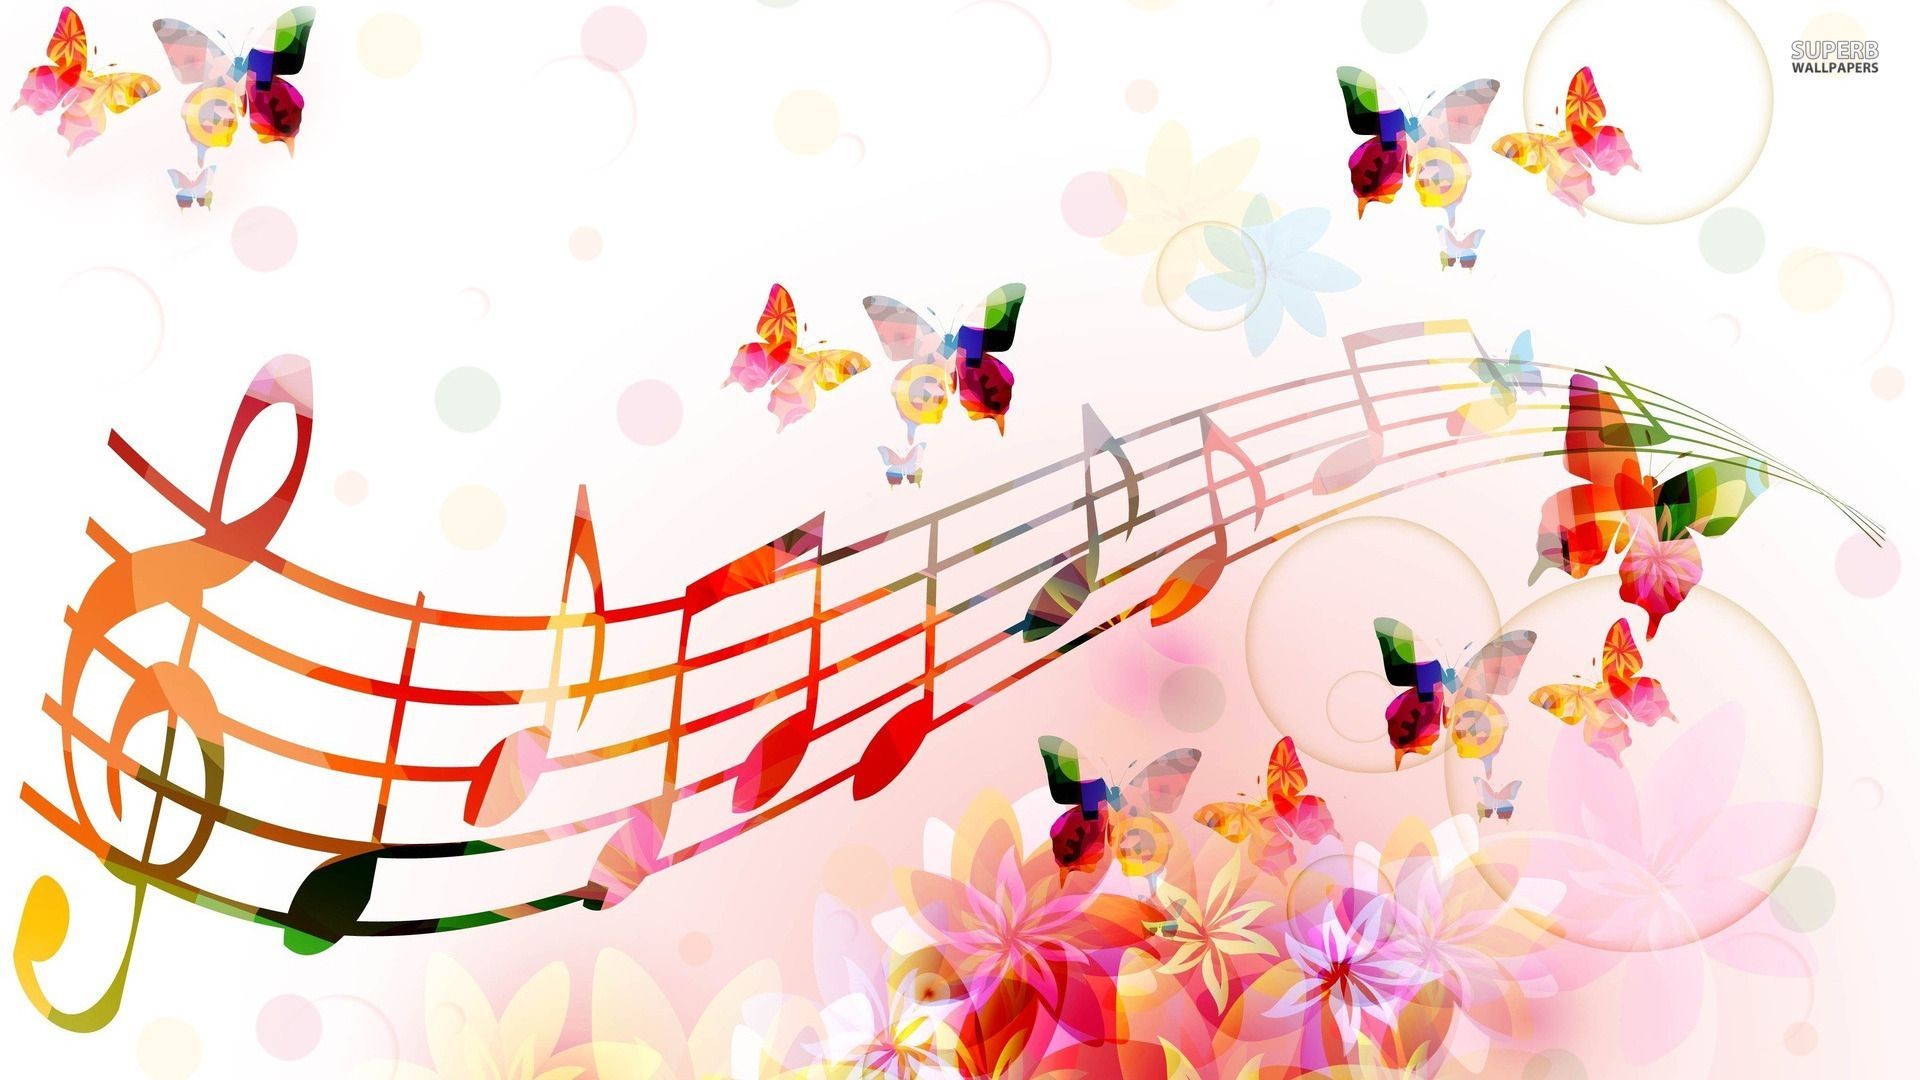 1920x1080 Colorful Music Notes Background Wallpaper High Resolution Wallpaper   px 192.99 KB